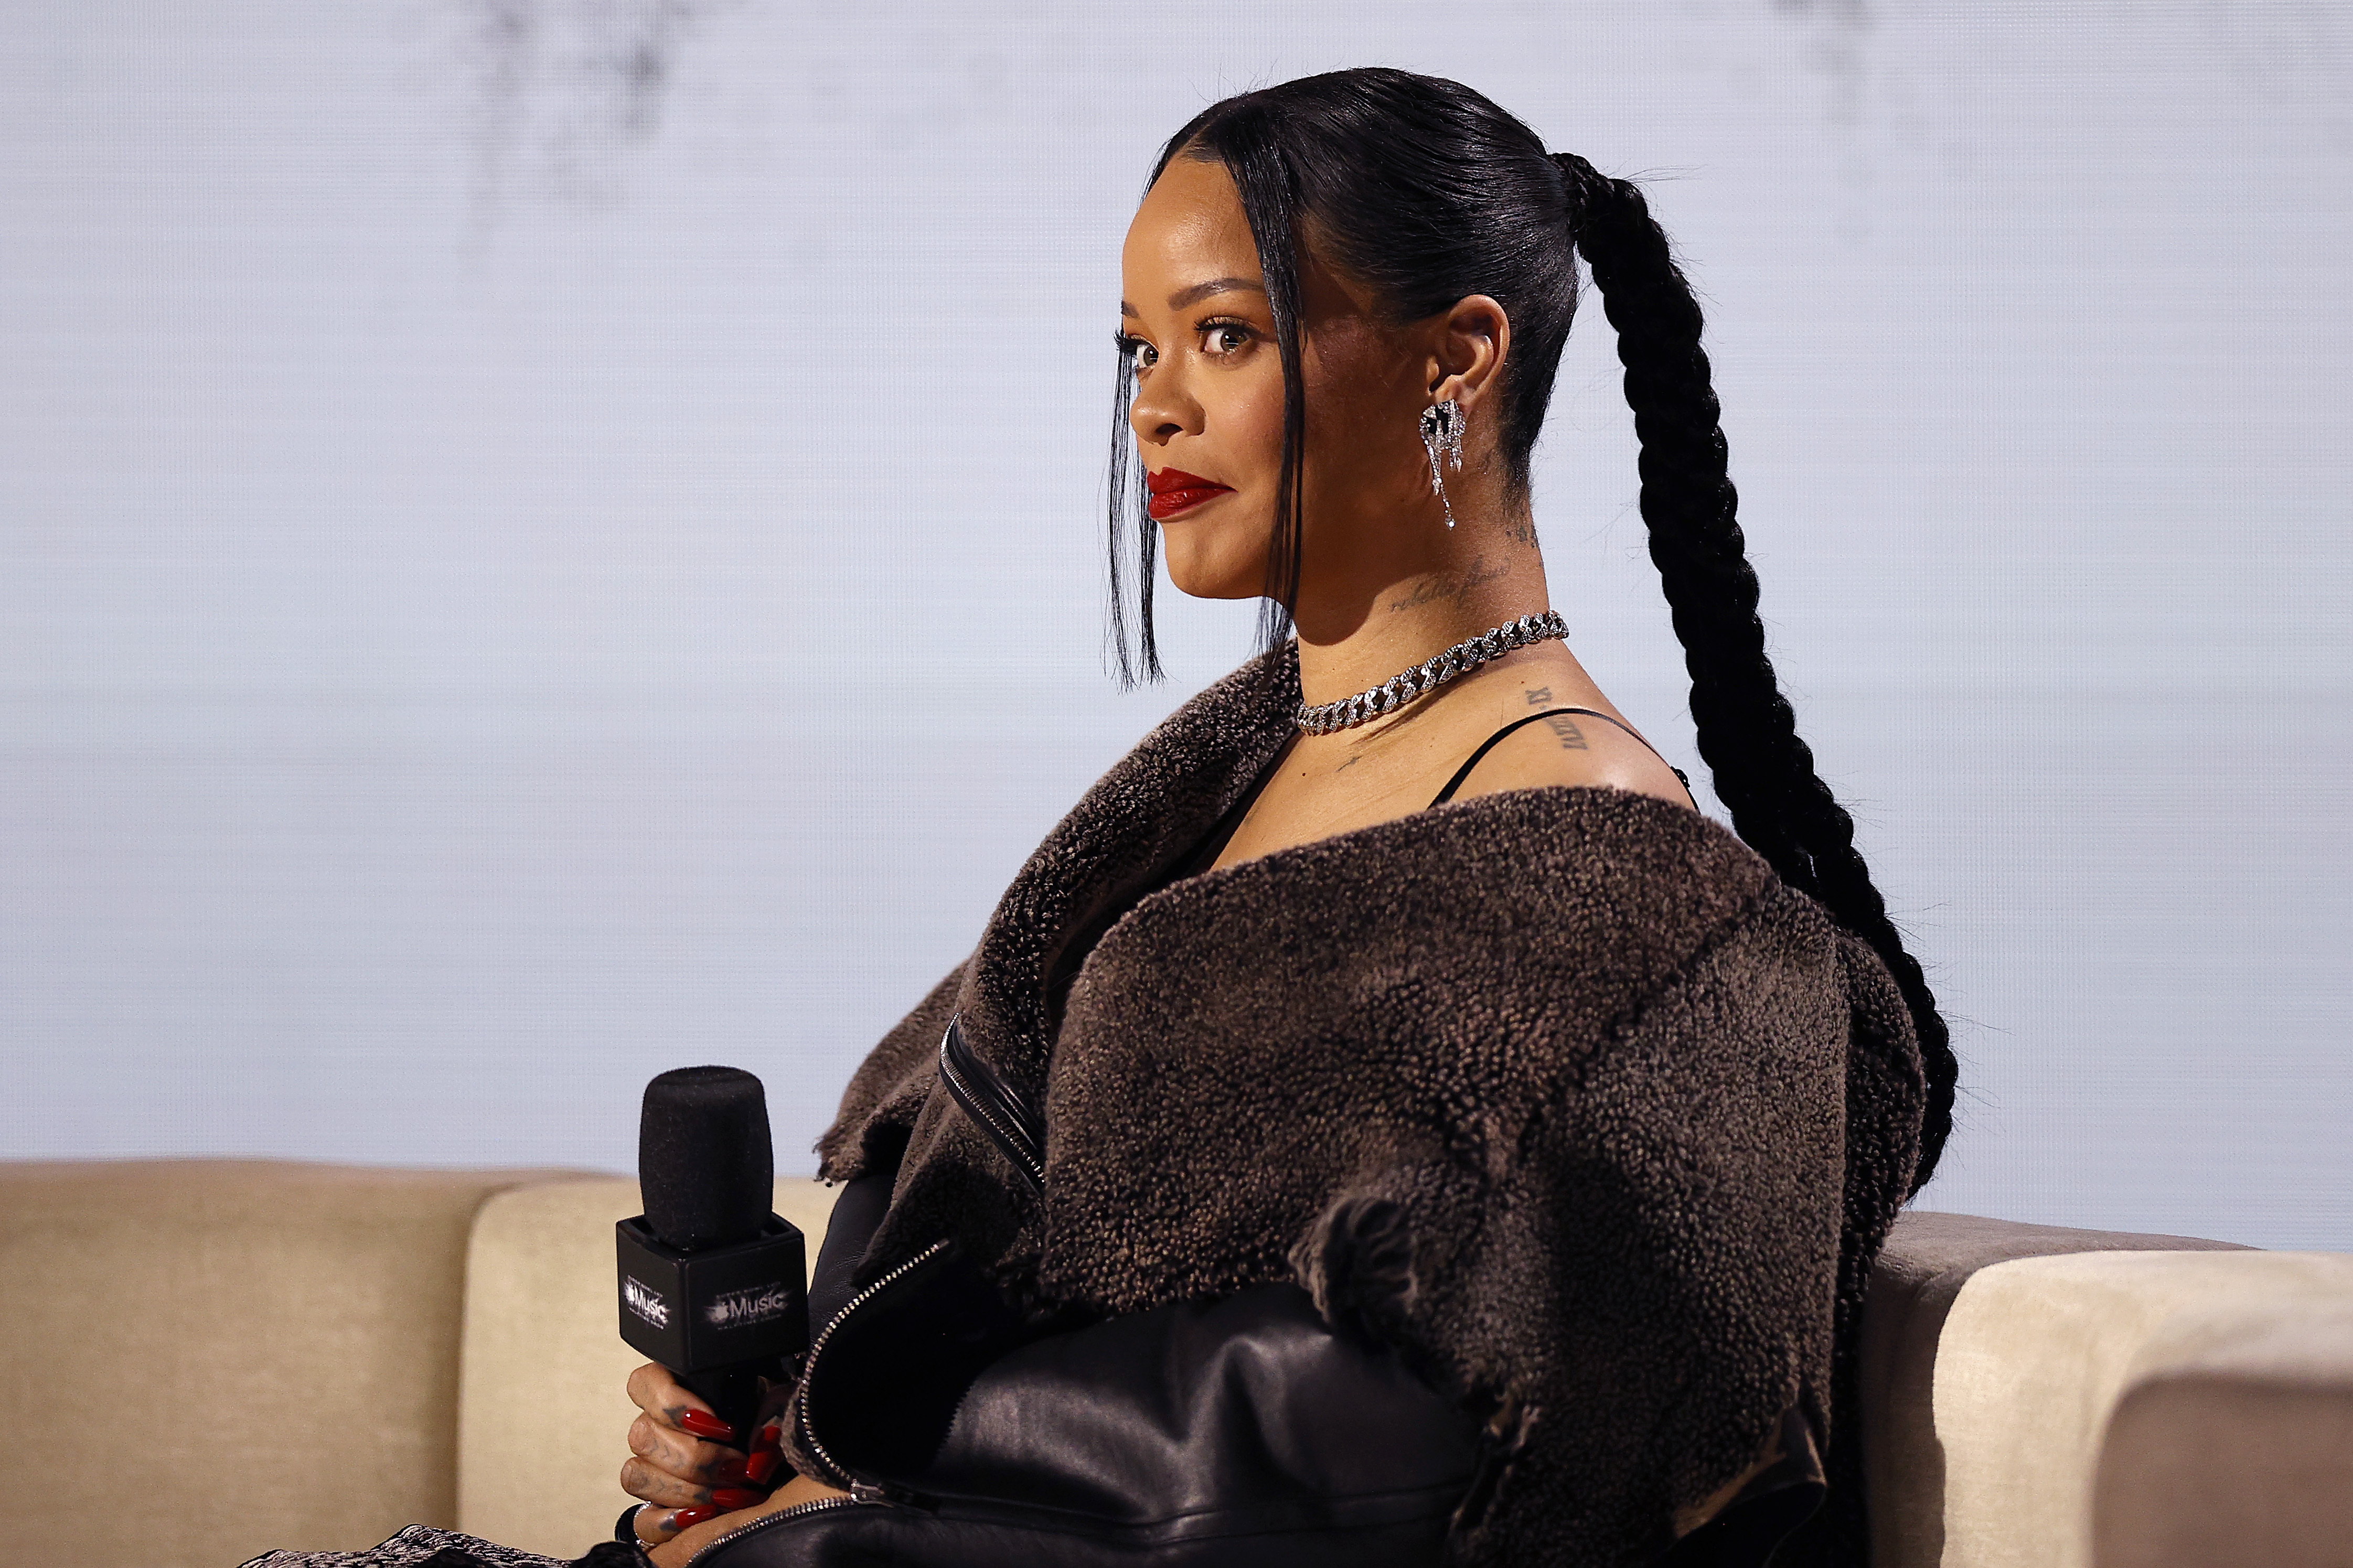 The Internet Simply Cannot Handle How Stunning Rihanna's Latest